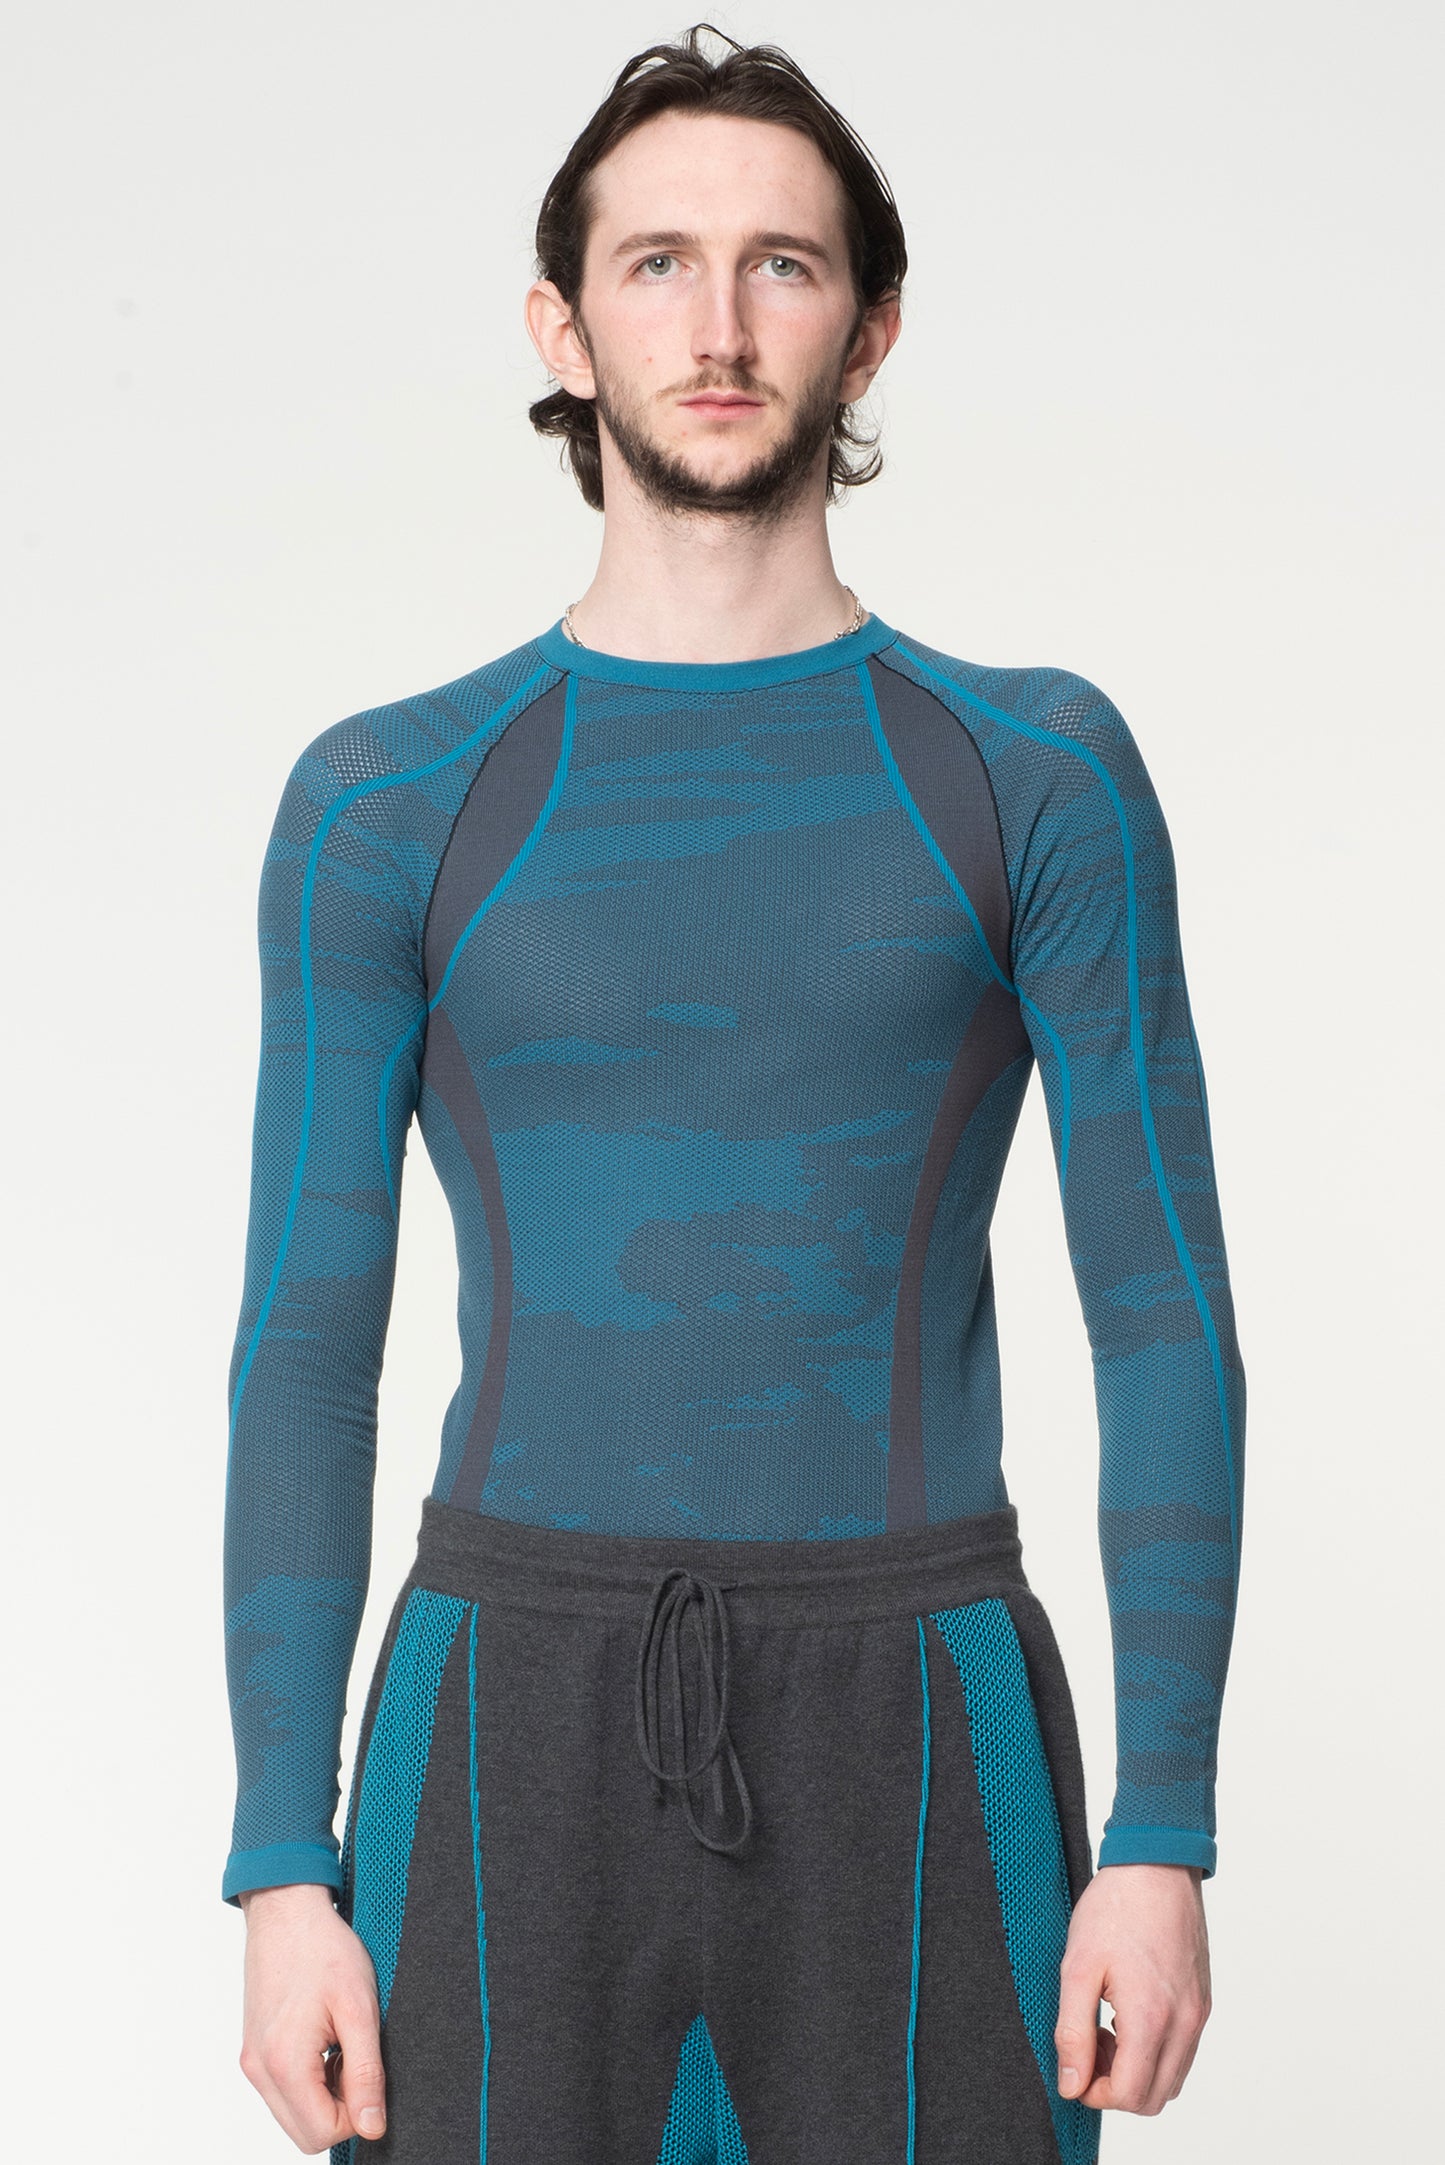 LONG SLEEVE SEAMLESS KNIT COMPRESSION - TEAL/ANTHRACITE